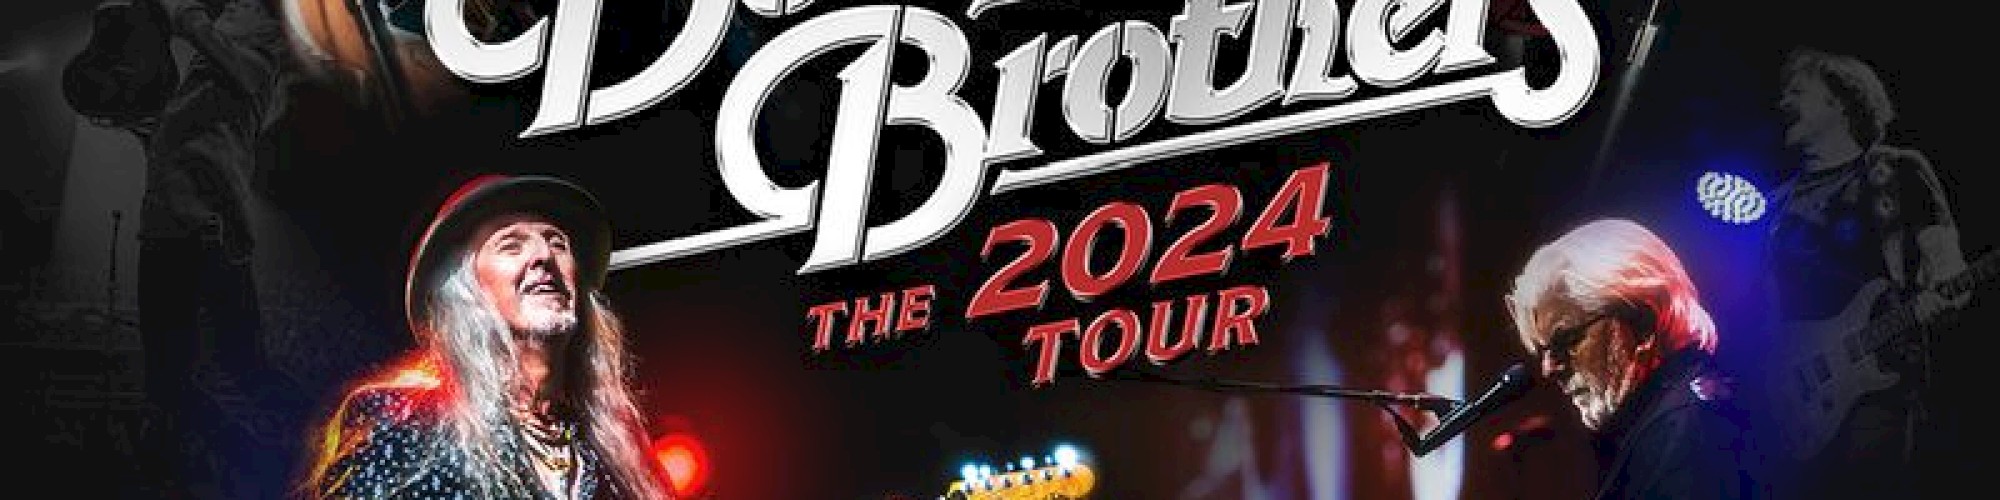 Stay at Riverhouse to see Doobie Brothers play in Bend Oregon